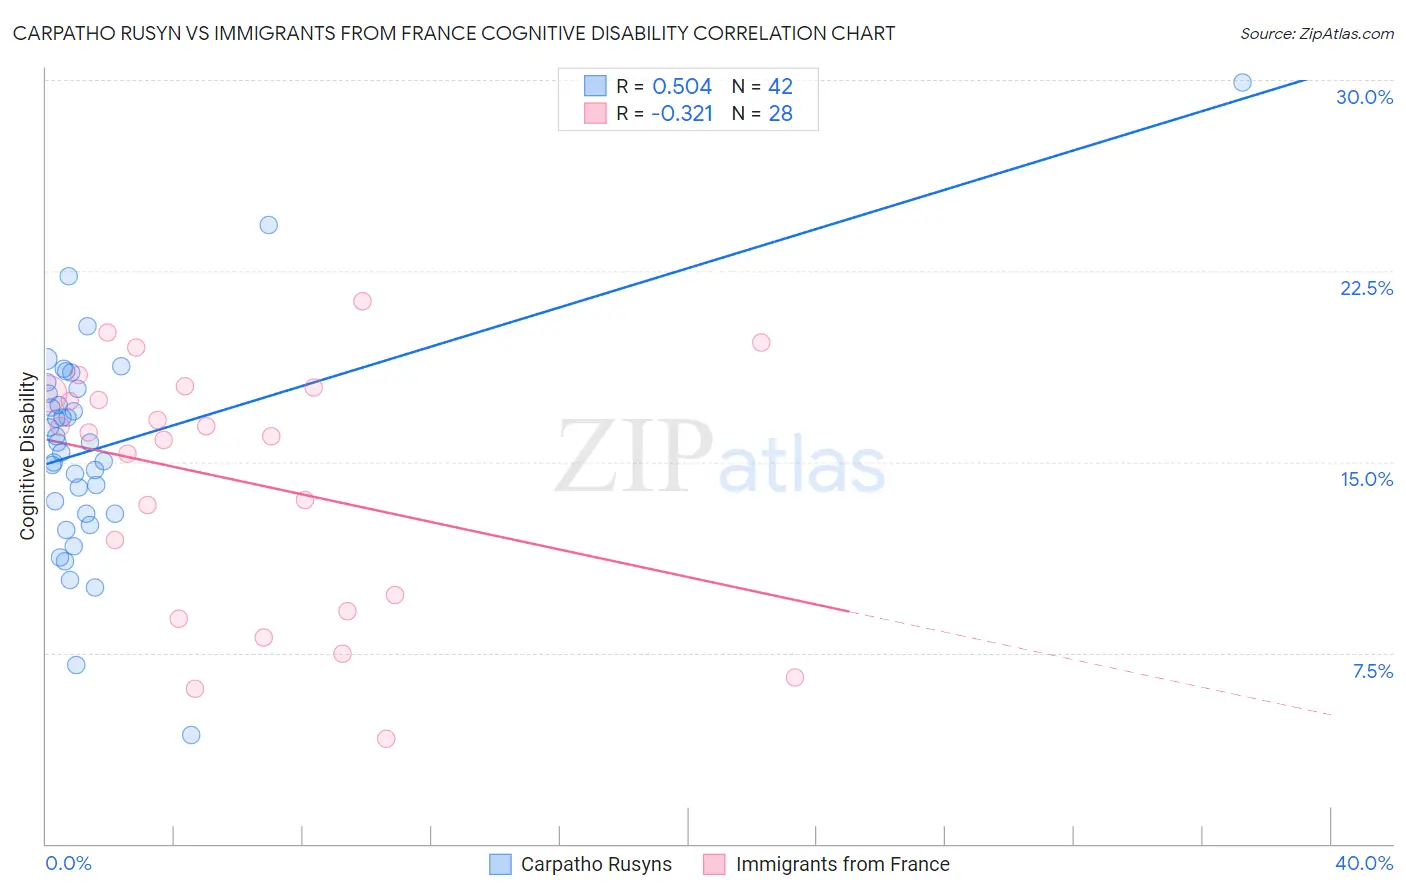 Carpatho Rusyn vs Immigrants from France Cognitive Disability